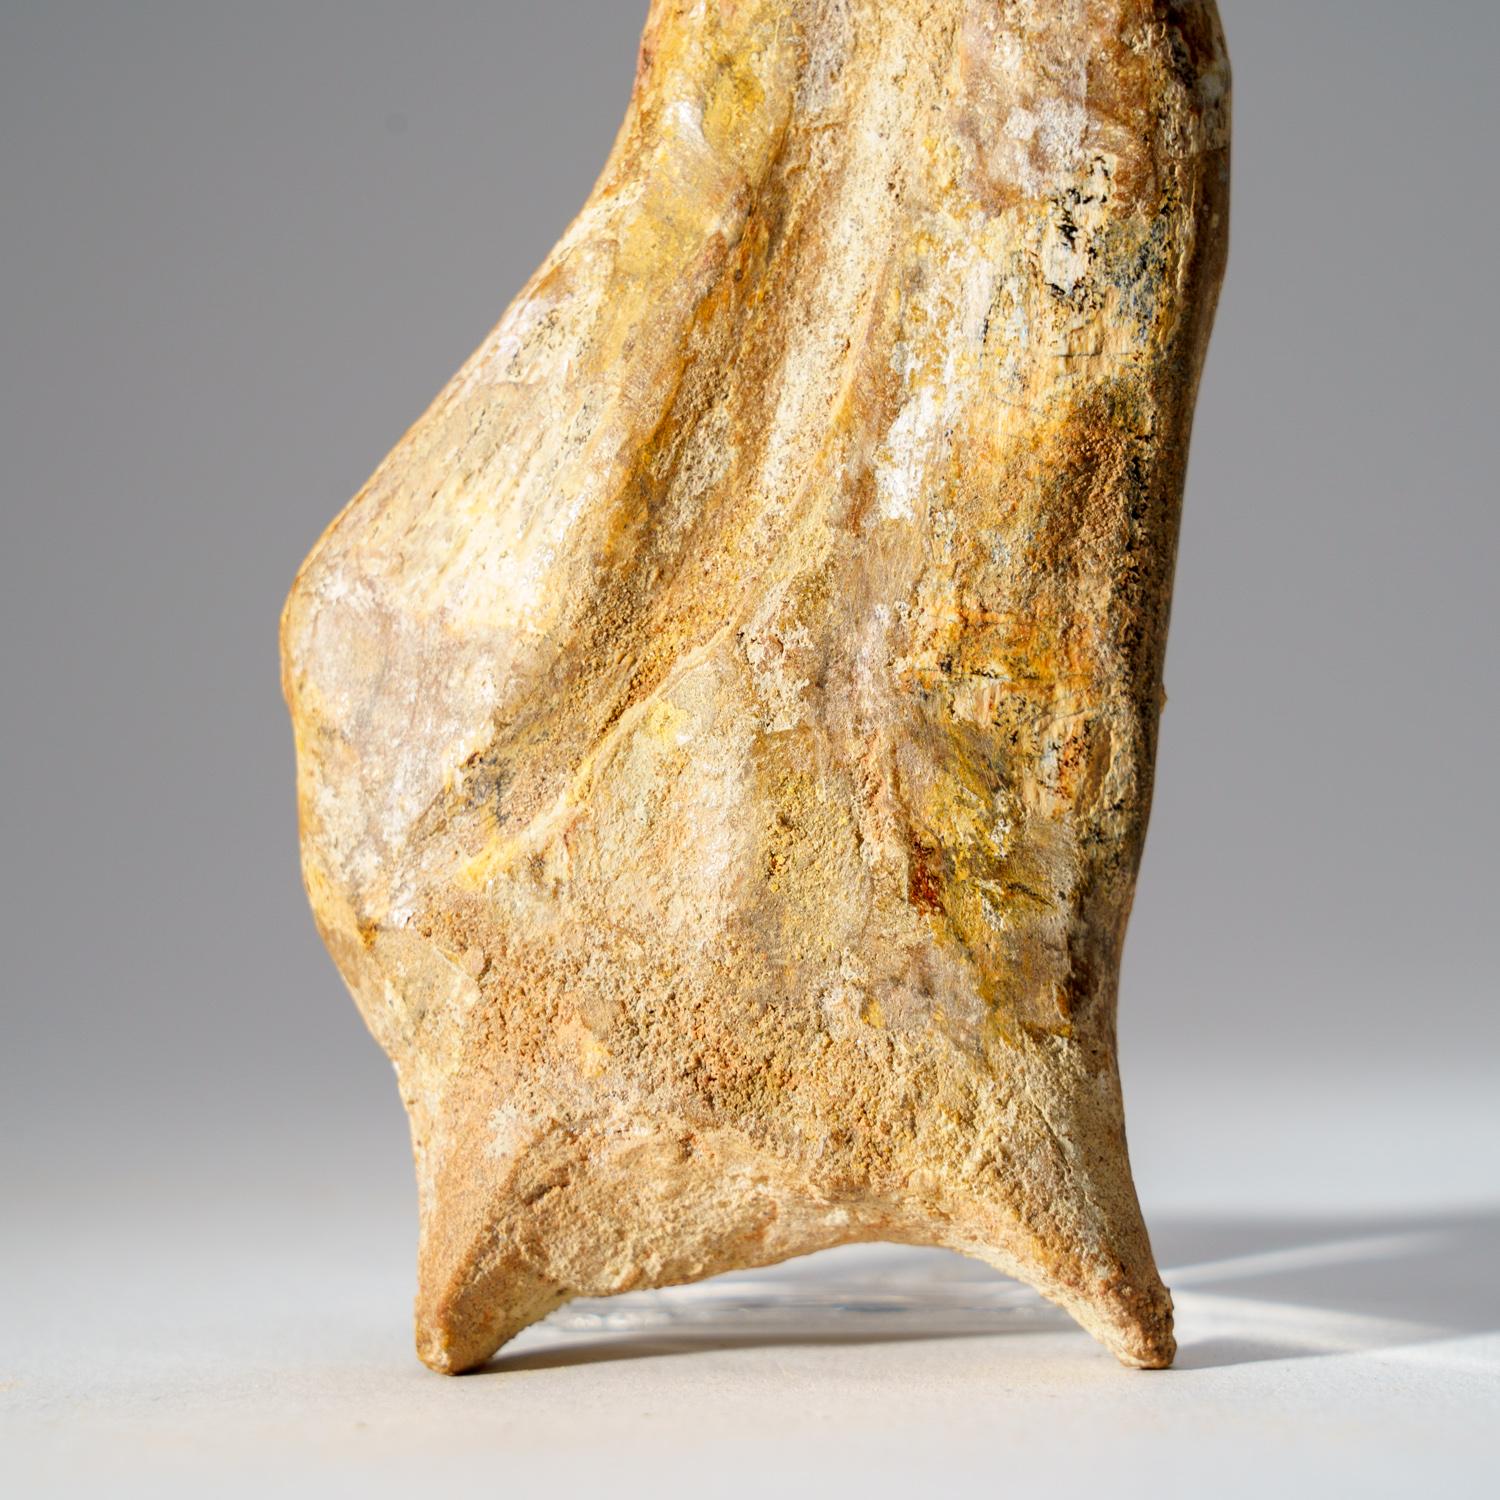 18th Century and Earlier Genuine Spinosaurus Claw in Display Case (190.5 grams)